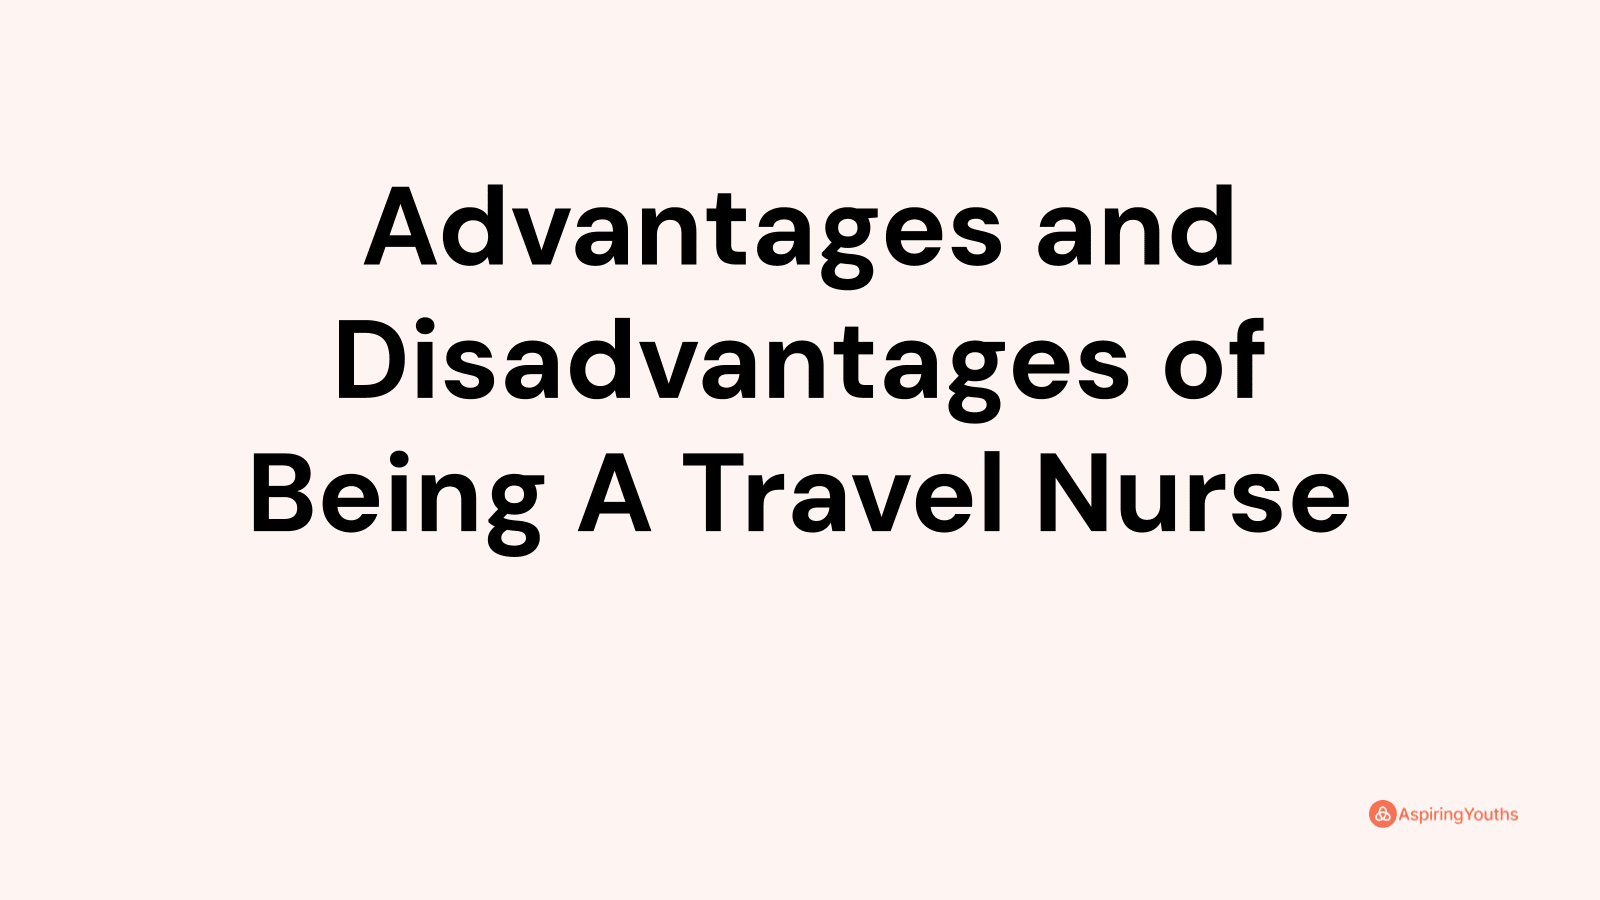 Advantages and disadvantages of Being A Travel Nurse